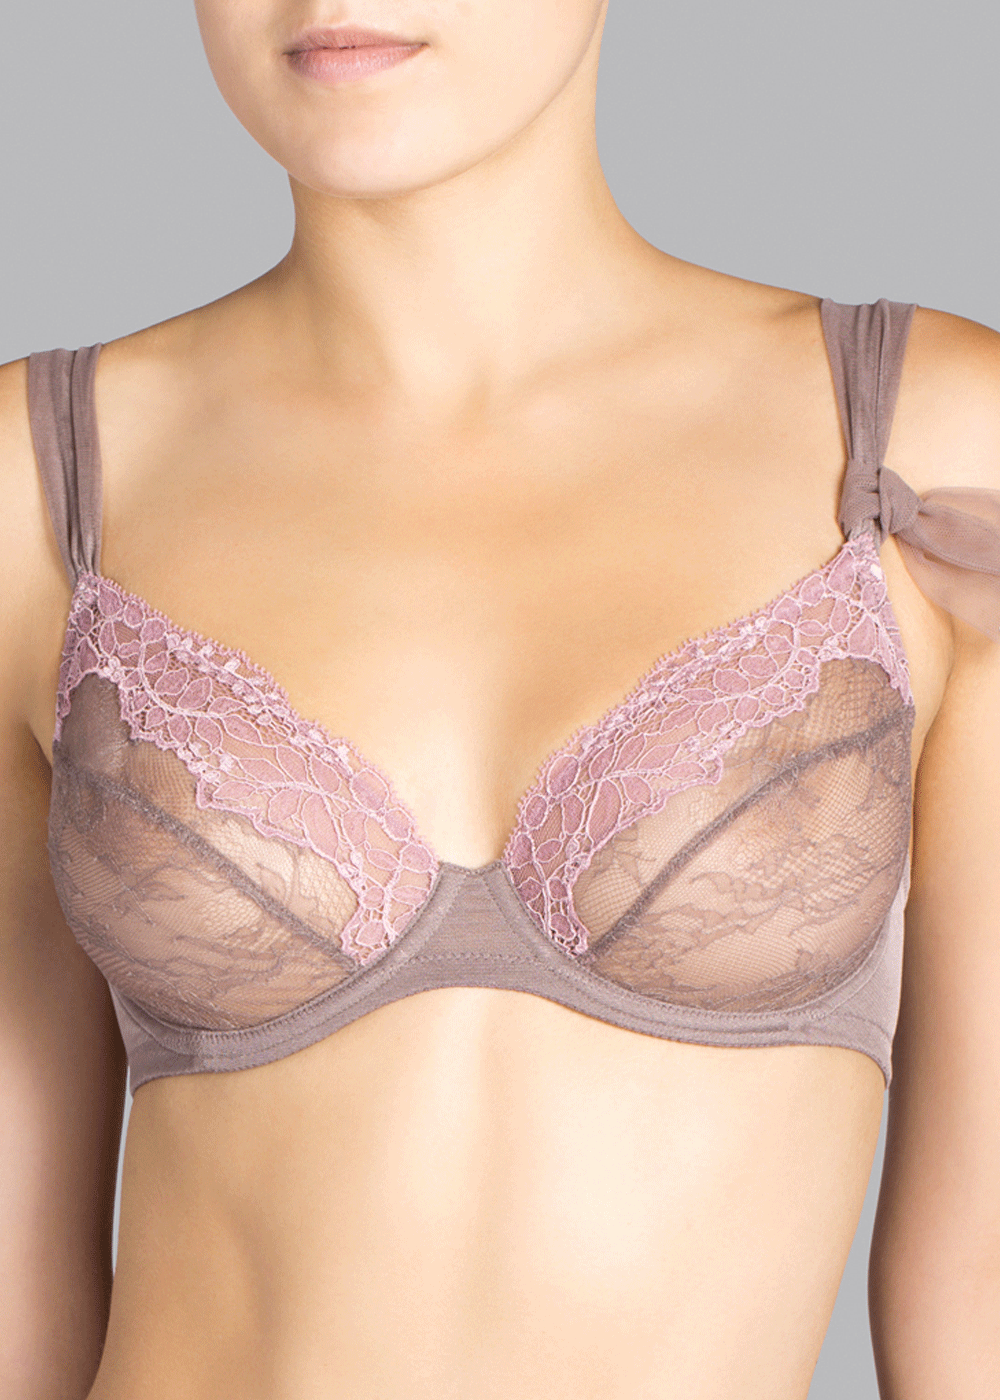 Soutien-gorge Armatures Emboitant Andres Sarda Taupe